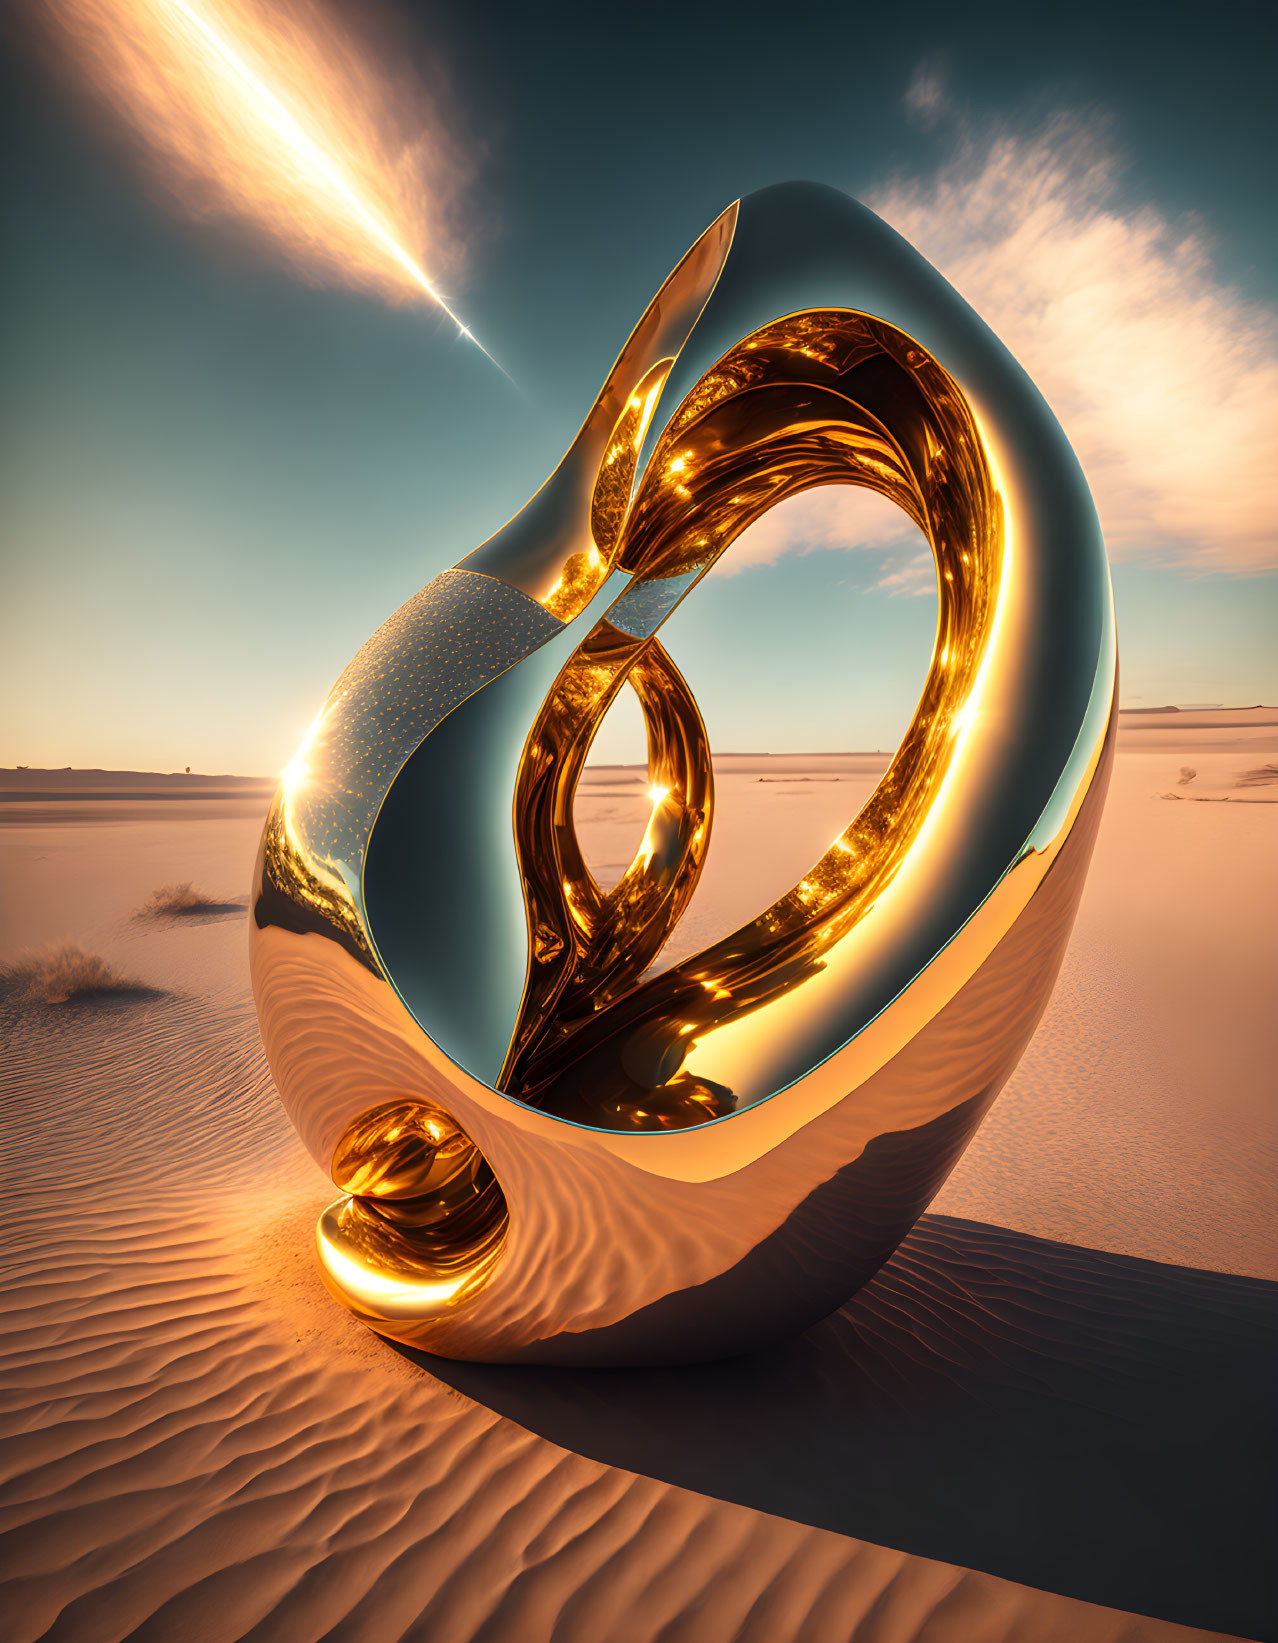 Gold and White Mobius Strip Sculpture on Sandy Dunes with Passing Comet